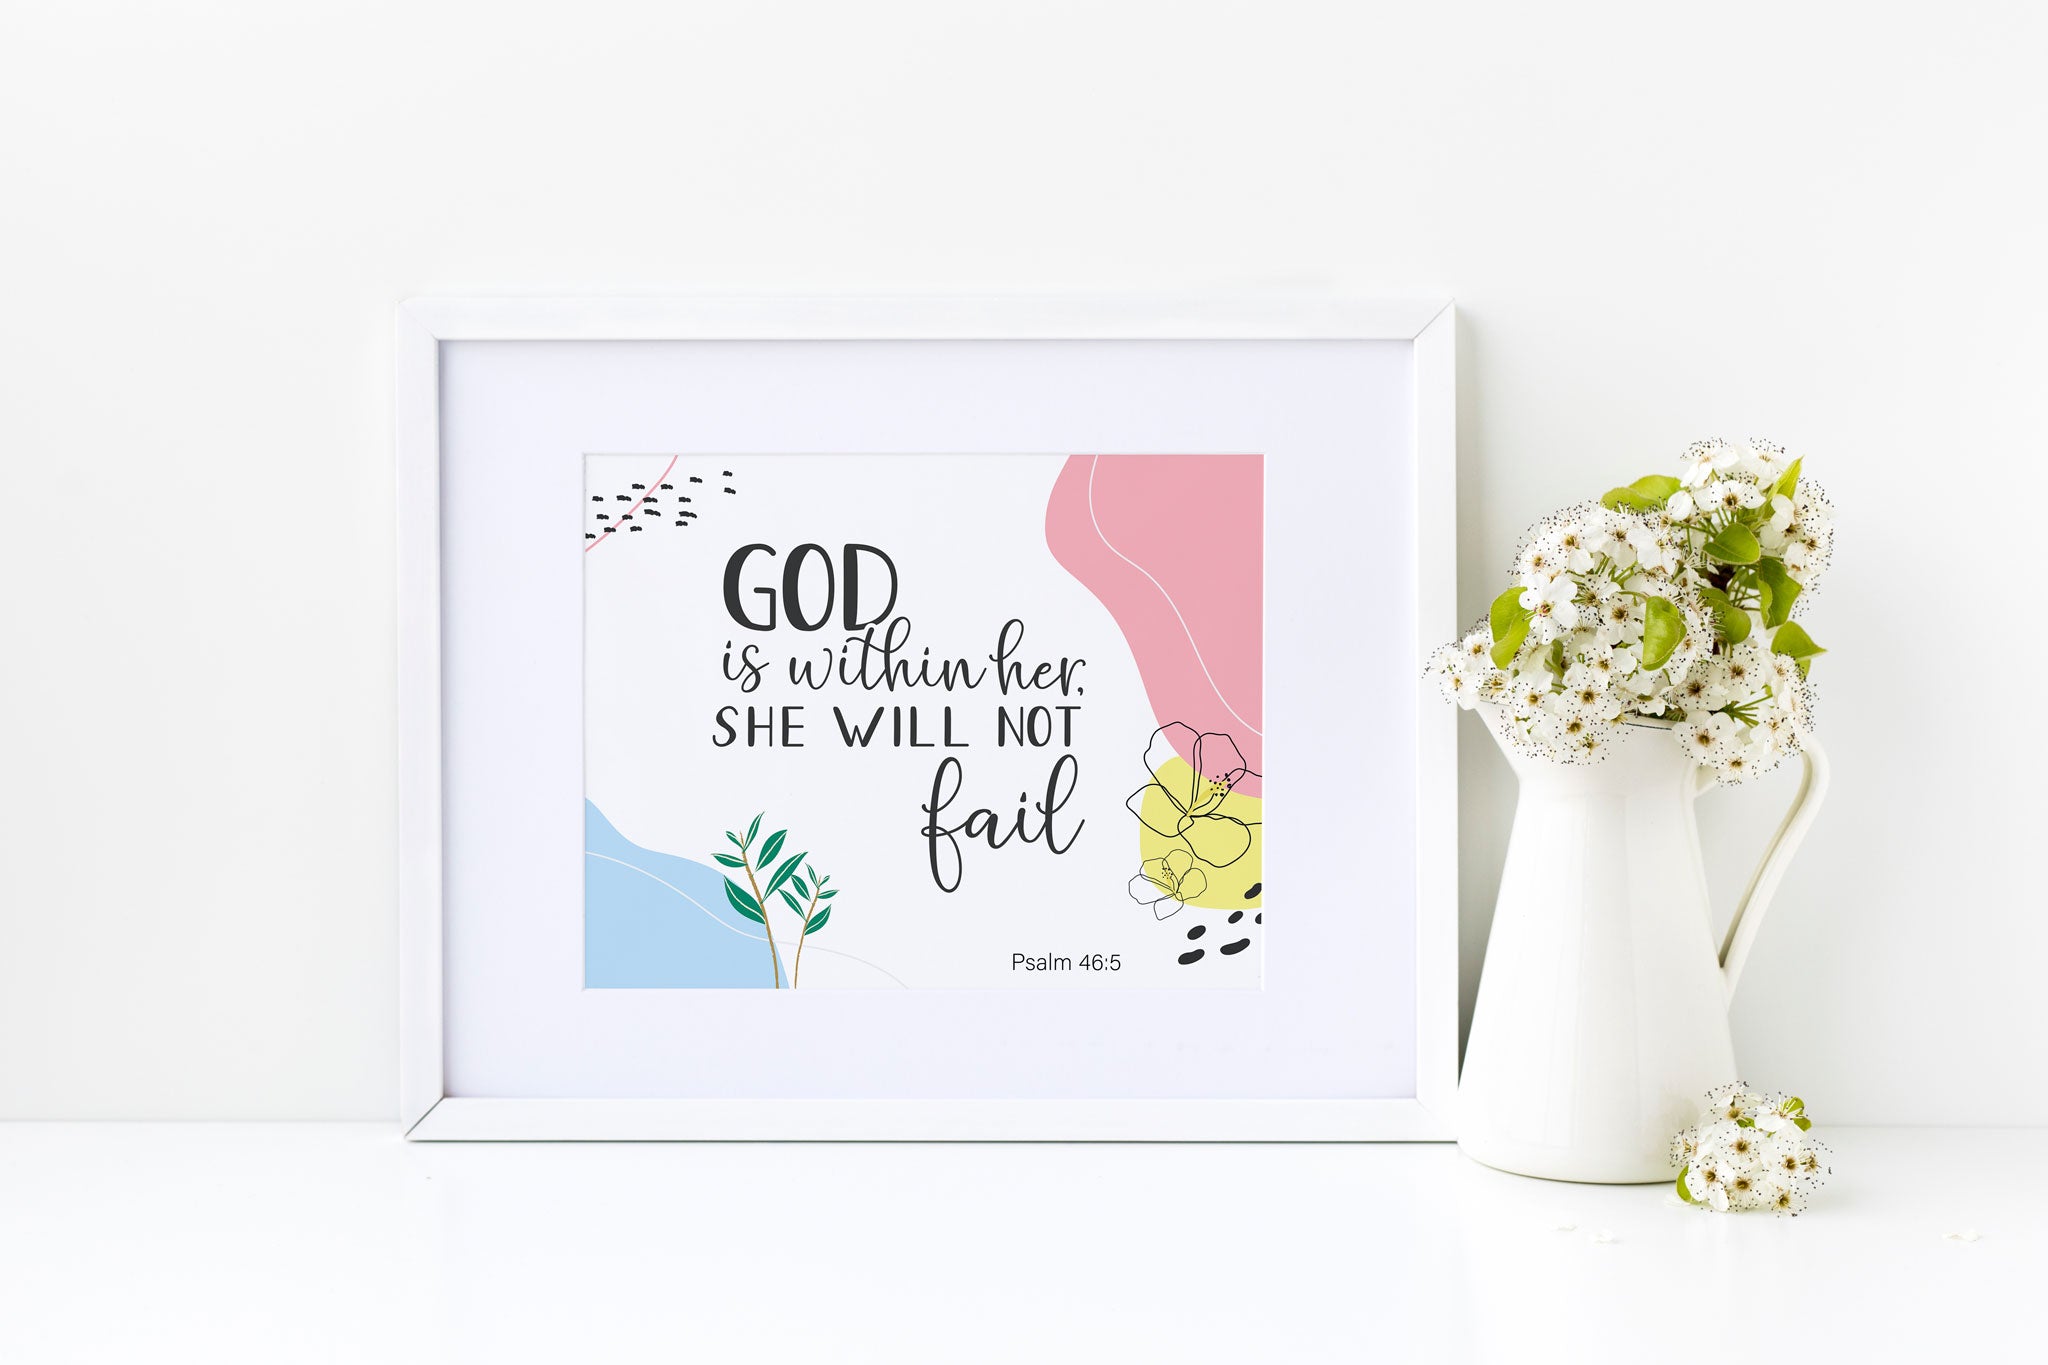 God is within her, she will not fail - Print